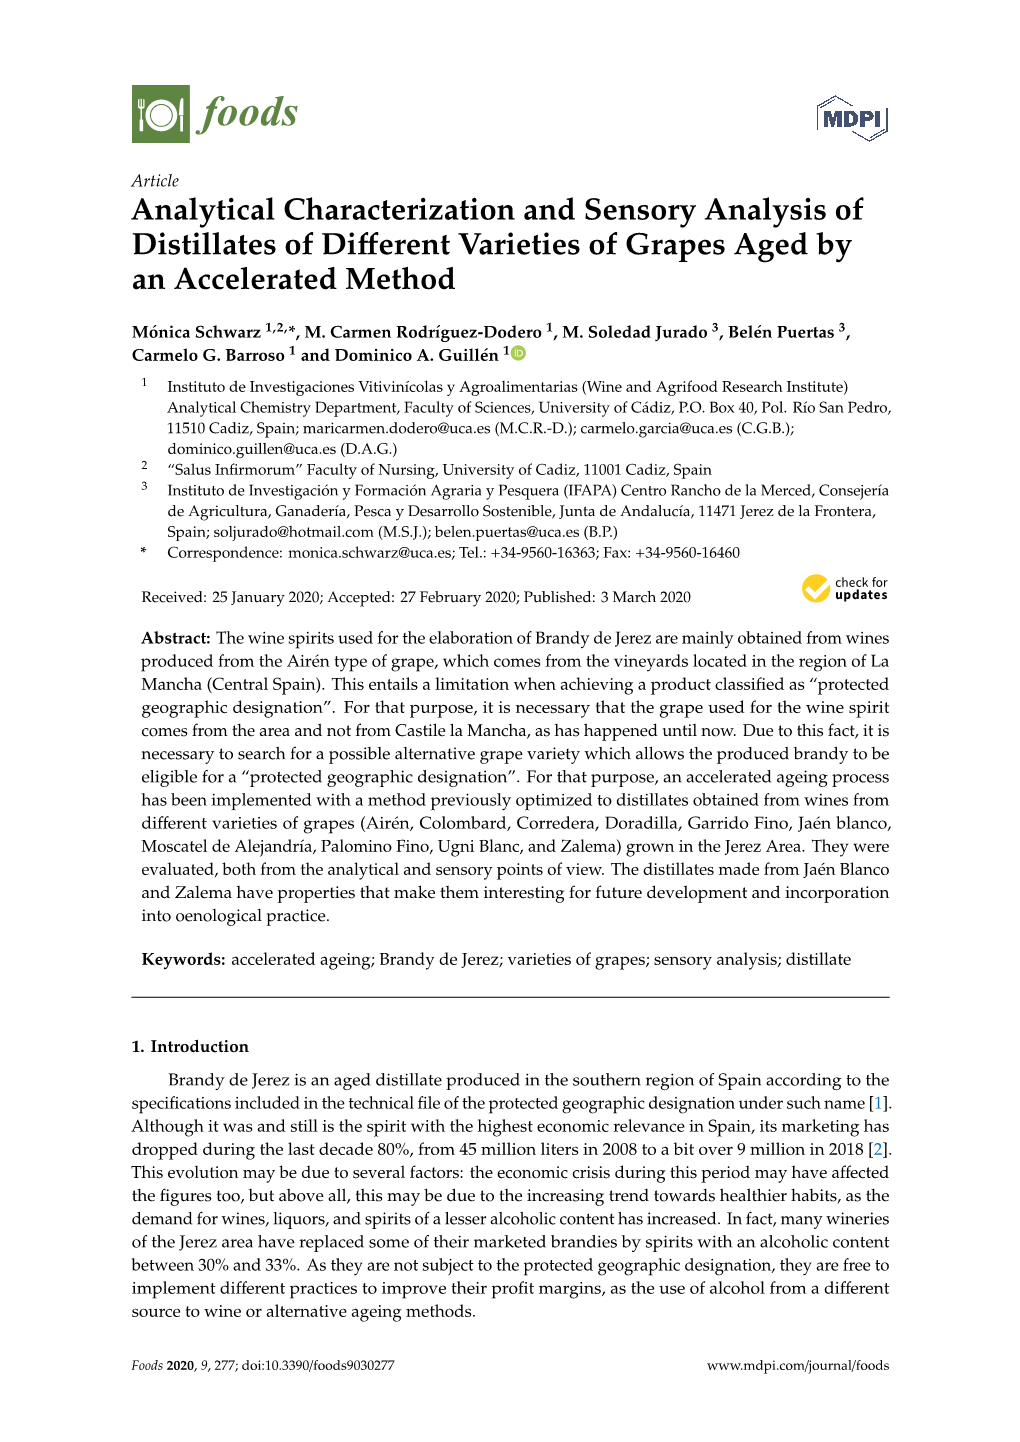 Analytical Characterization and Sensory Analysis of Distillates of Diﬀerent Varieties of Grapes Aged by an Accelerated Method